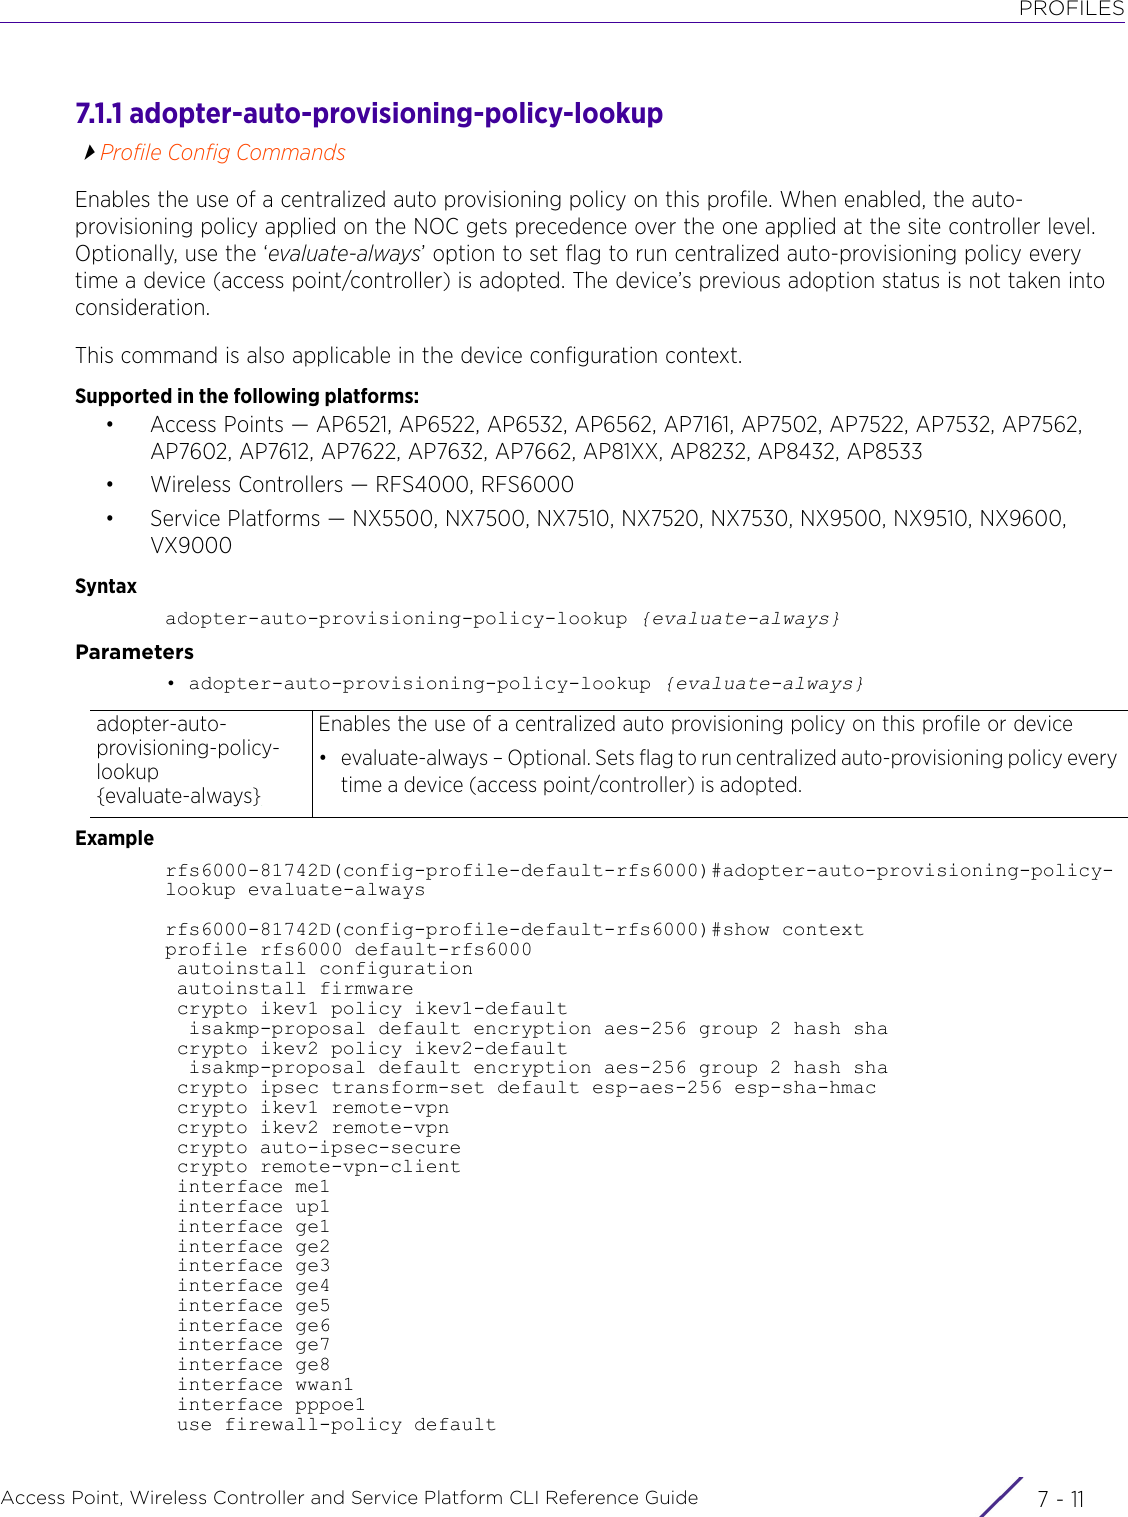 PROFILESAccess Point, Wireless Controller and Service Platform CLI Reference Guide 7 - 117.1.1 adopter-auto-provisioning-policy-lookupProfile Config CommandsEnables the use of a centralized auto provisioning policy on this profile. When enabled, the auto-provisioning policy applied on the NOC gets precedence over the one applied at the site controller level. Optionally, use the ‘evaluate-always’ option to set flag to run centralized auto-provisioning policy every time a device (access point/controller) is adopted. The device’s previous adoption status is not taken into consideration.This command is also applicable in the device configuration context.Supported in the following platforms:• Access Points — AP6521, AP6522, AP6532, AP6562, AP7161, AP7502, AP7522, AP7532, AP7562, AP7602, AP7612, AP7622, AP7632, AP7662, AP81XX, AP8232, AP8432, AP8533• Wireless Controllers — RFS4000, RFS6000• Service Platforms — NX5500, NX7500, NX7510, NX7520, NX7530, NX9500, NX9510, NX9600, VX9000Syntaxadopter-auto-provisioning-policy-lookup {evaluate-always}Parameters• adopter-auto-provisioning-policy-lookup {evaluate-always}Examplerfs6000-81742D(config-profile-default-rfs6000)#adopter-auto-provisioning-policy-lookup evaluate-alwaysrfs6000-81742D(config-profile-default-rfs6000)#show contextprofile rfs6000 default-rfs6000 autoinstall configuration autoinstall firmware crypto ikev1 policy ikev1-default  isakmp-proposal default encryption aes-256 group 2 hash sha crypto ikev2 policy ikev2-default  isakmp-proposal default encryption aes-256 group 2 hash sha crypto ipsec transform-set default esp-aes-256 esp-sha-hmac crypto ikev1 remote-vpn crypto ikev2 remote-vpn crypto auto-ipsec-secure crypto remote-vpn-client interface me1 interface up1 interface ge1 interface ge2 interface ge3 interface ge4 interface ge5 interface ge6 interface ge7 interface ge8 interface wwan1 interface pppoe1 use firewall-policy defaultadopter-auto-provisioning-policy-lookup {evaluate-always}Enables the use of a centralized auto provisioning policy on this profile or device• evaluate-always – Optional. Sets flag to run centralized auto-provisioning policy every time a device (access point/controller) is adopted.